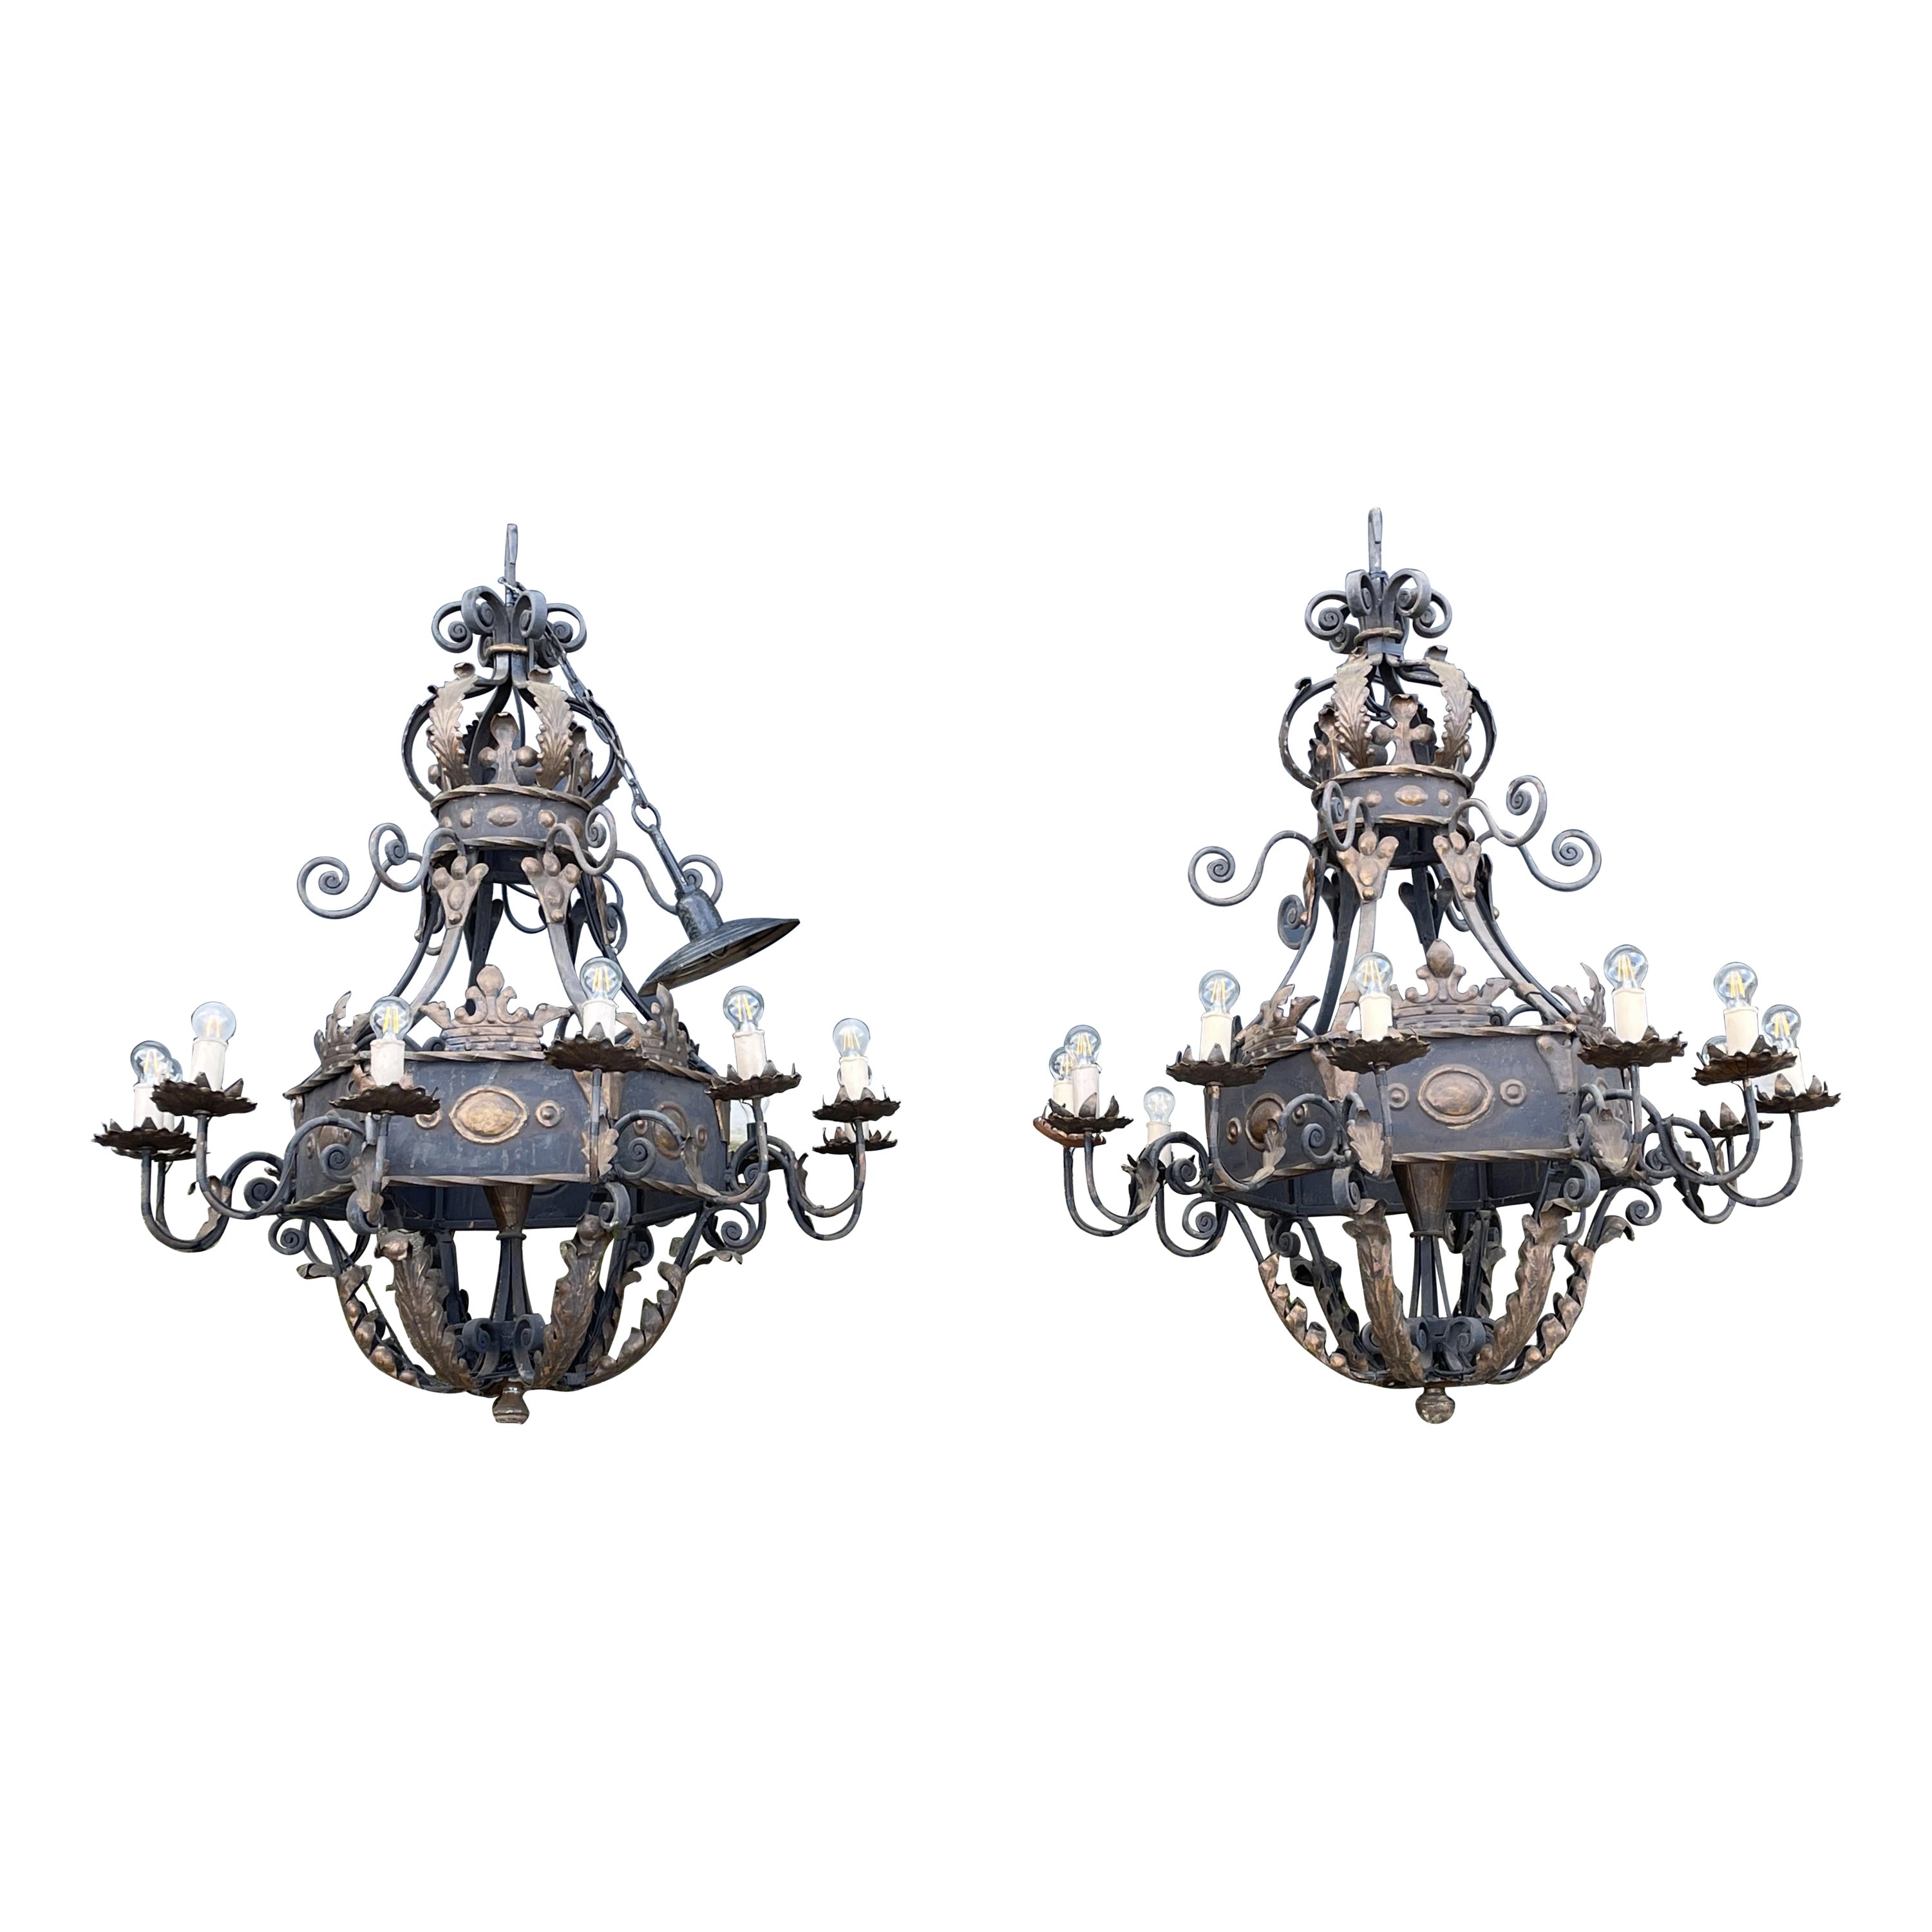 HUGE Pair of 13-Light Handforged Wrought Iron Castle Chandeliers w. Gothic Crown For Sale